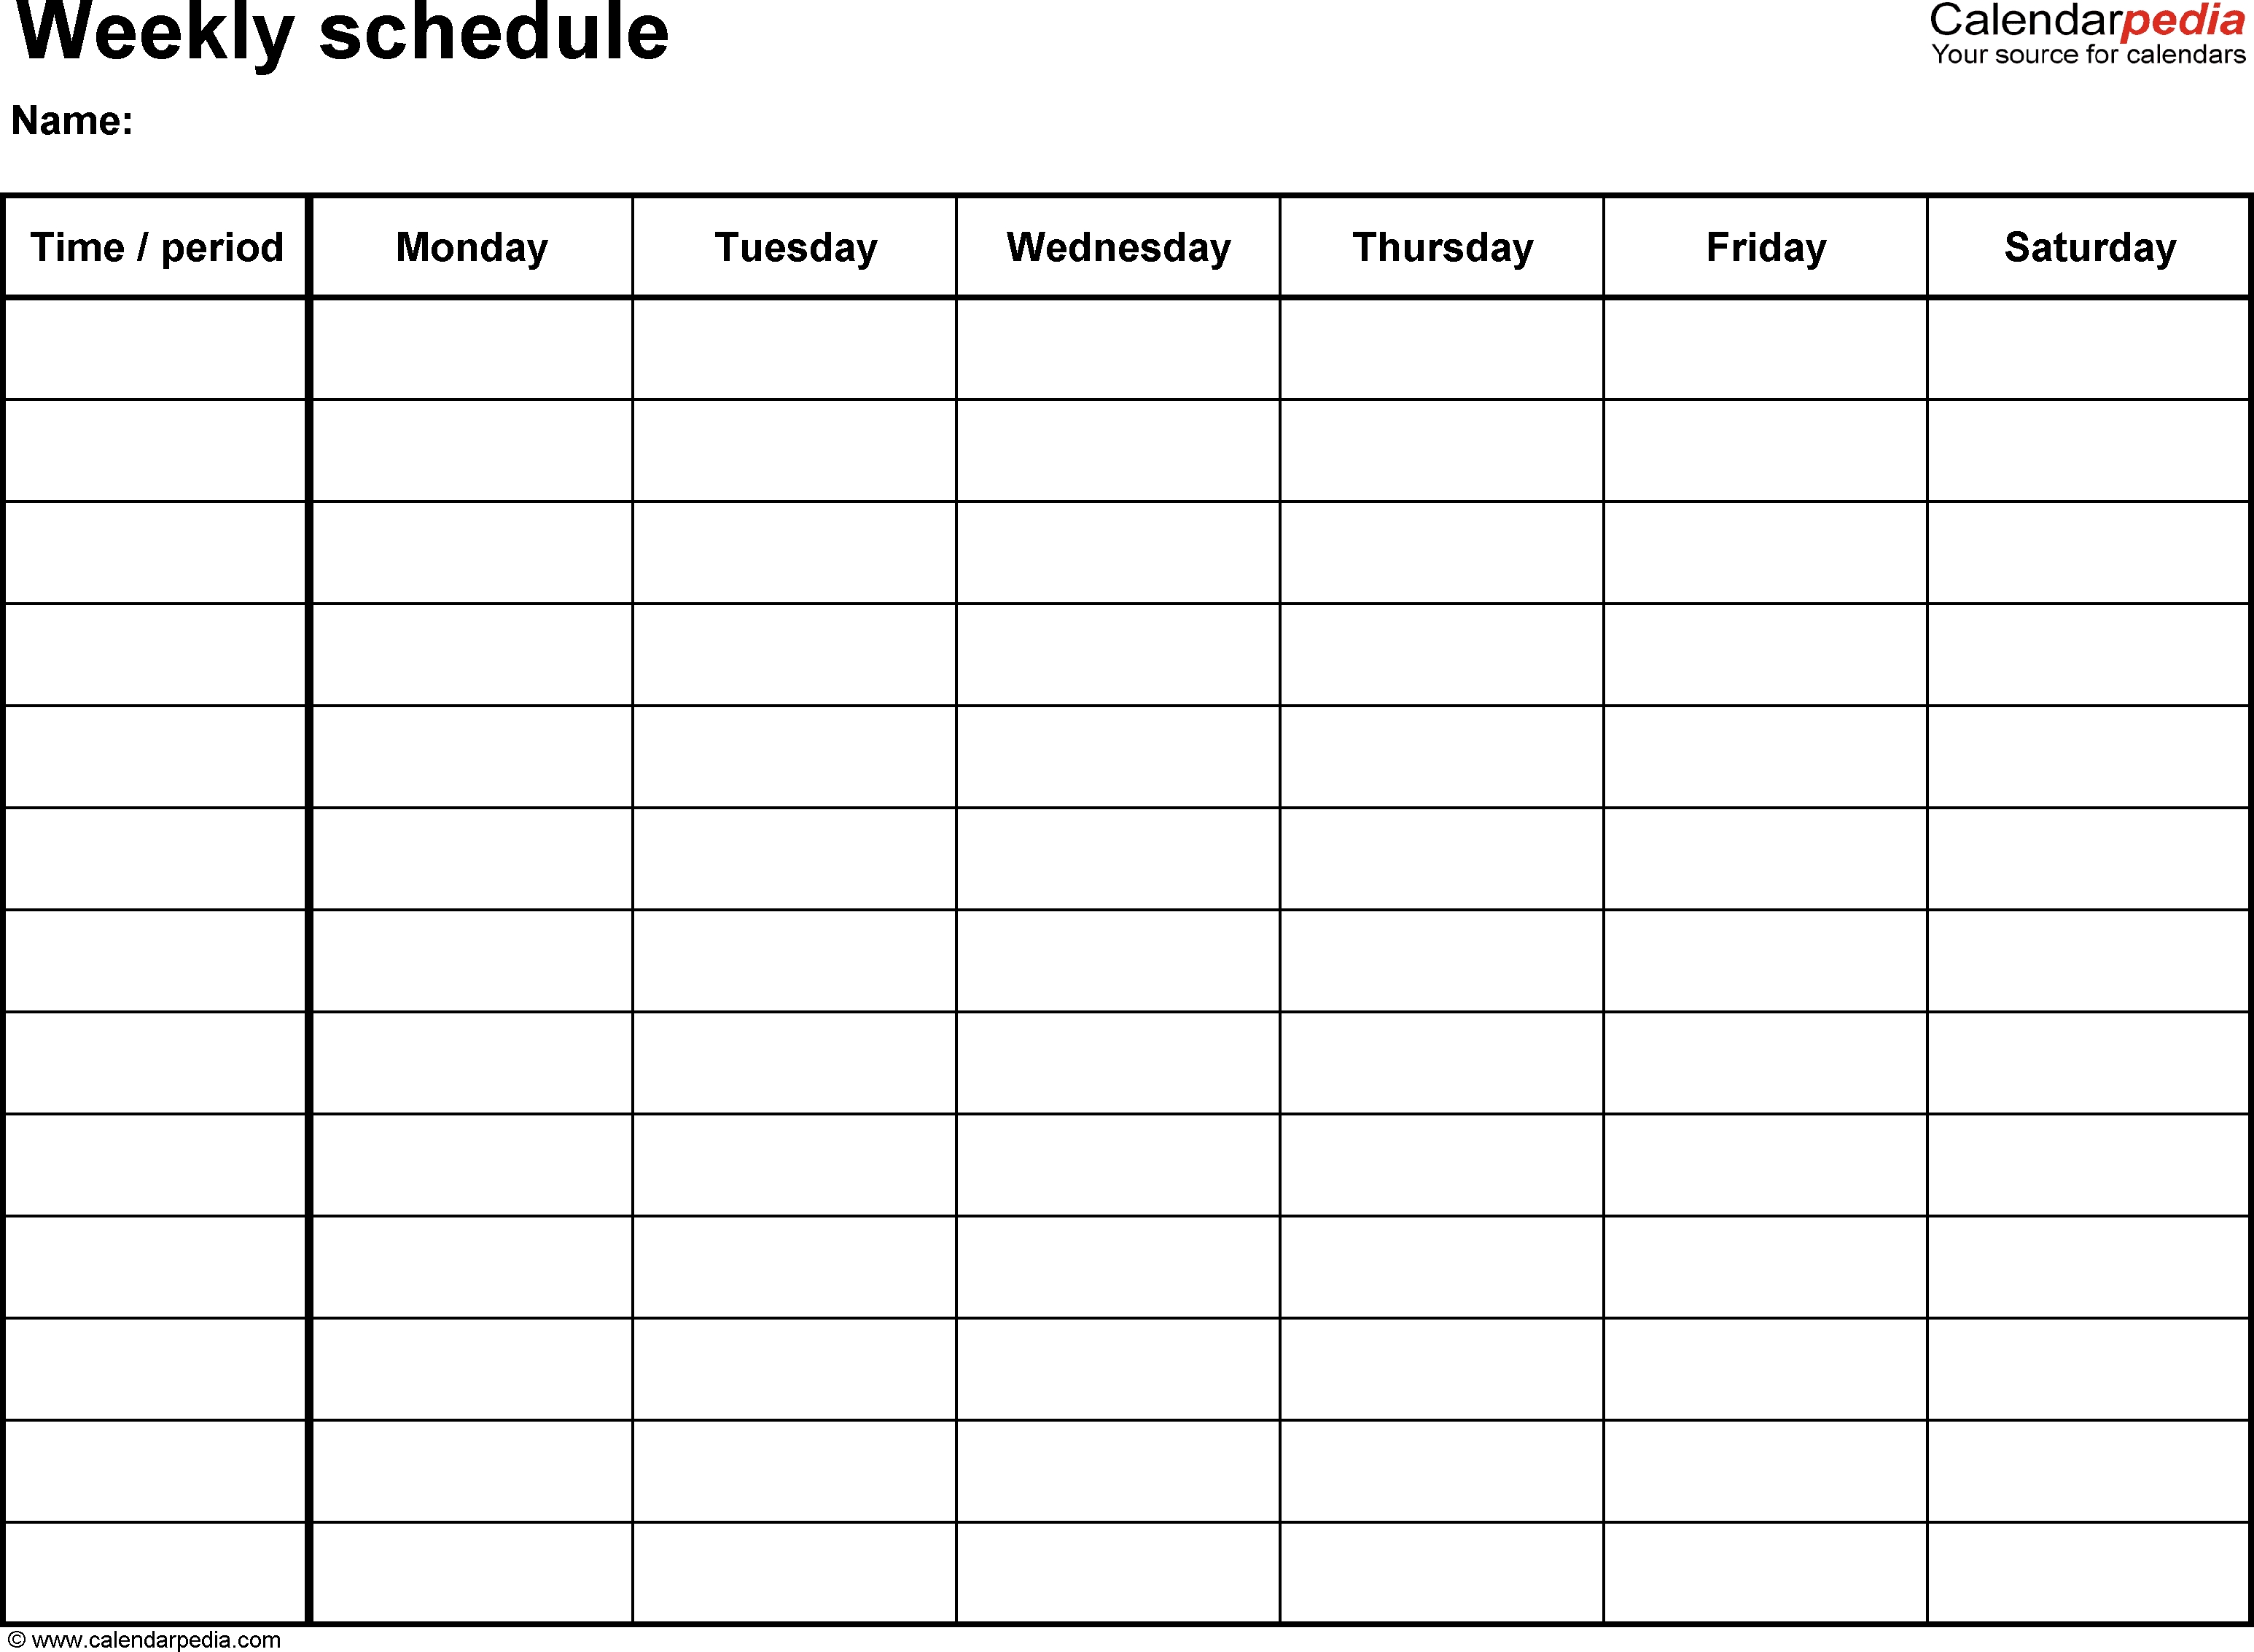 Free Weekly Schedule Templates For Excel - 18 Templates pertaining to Printable Week By Week Schedule